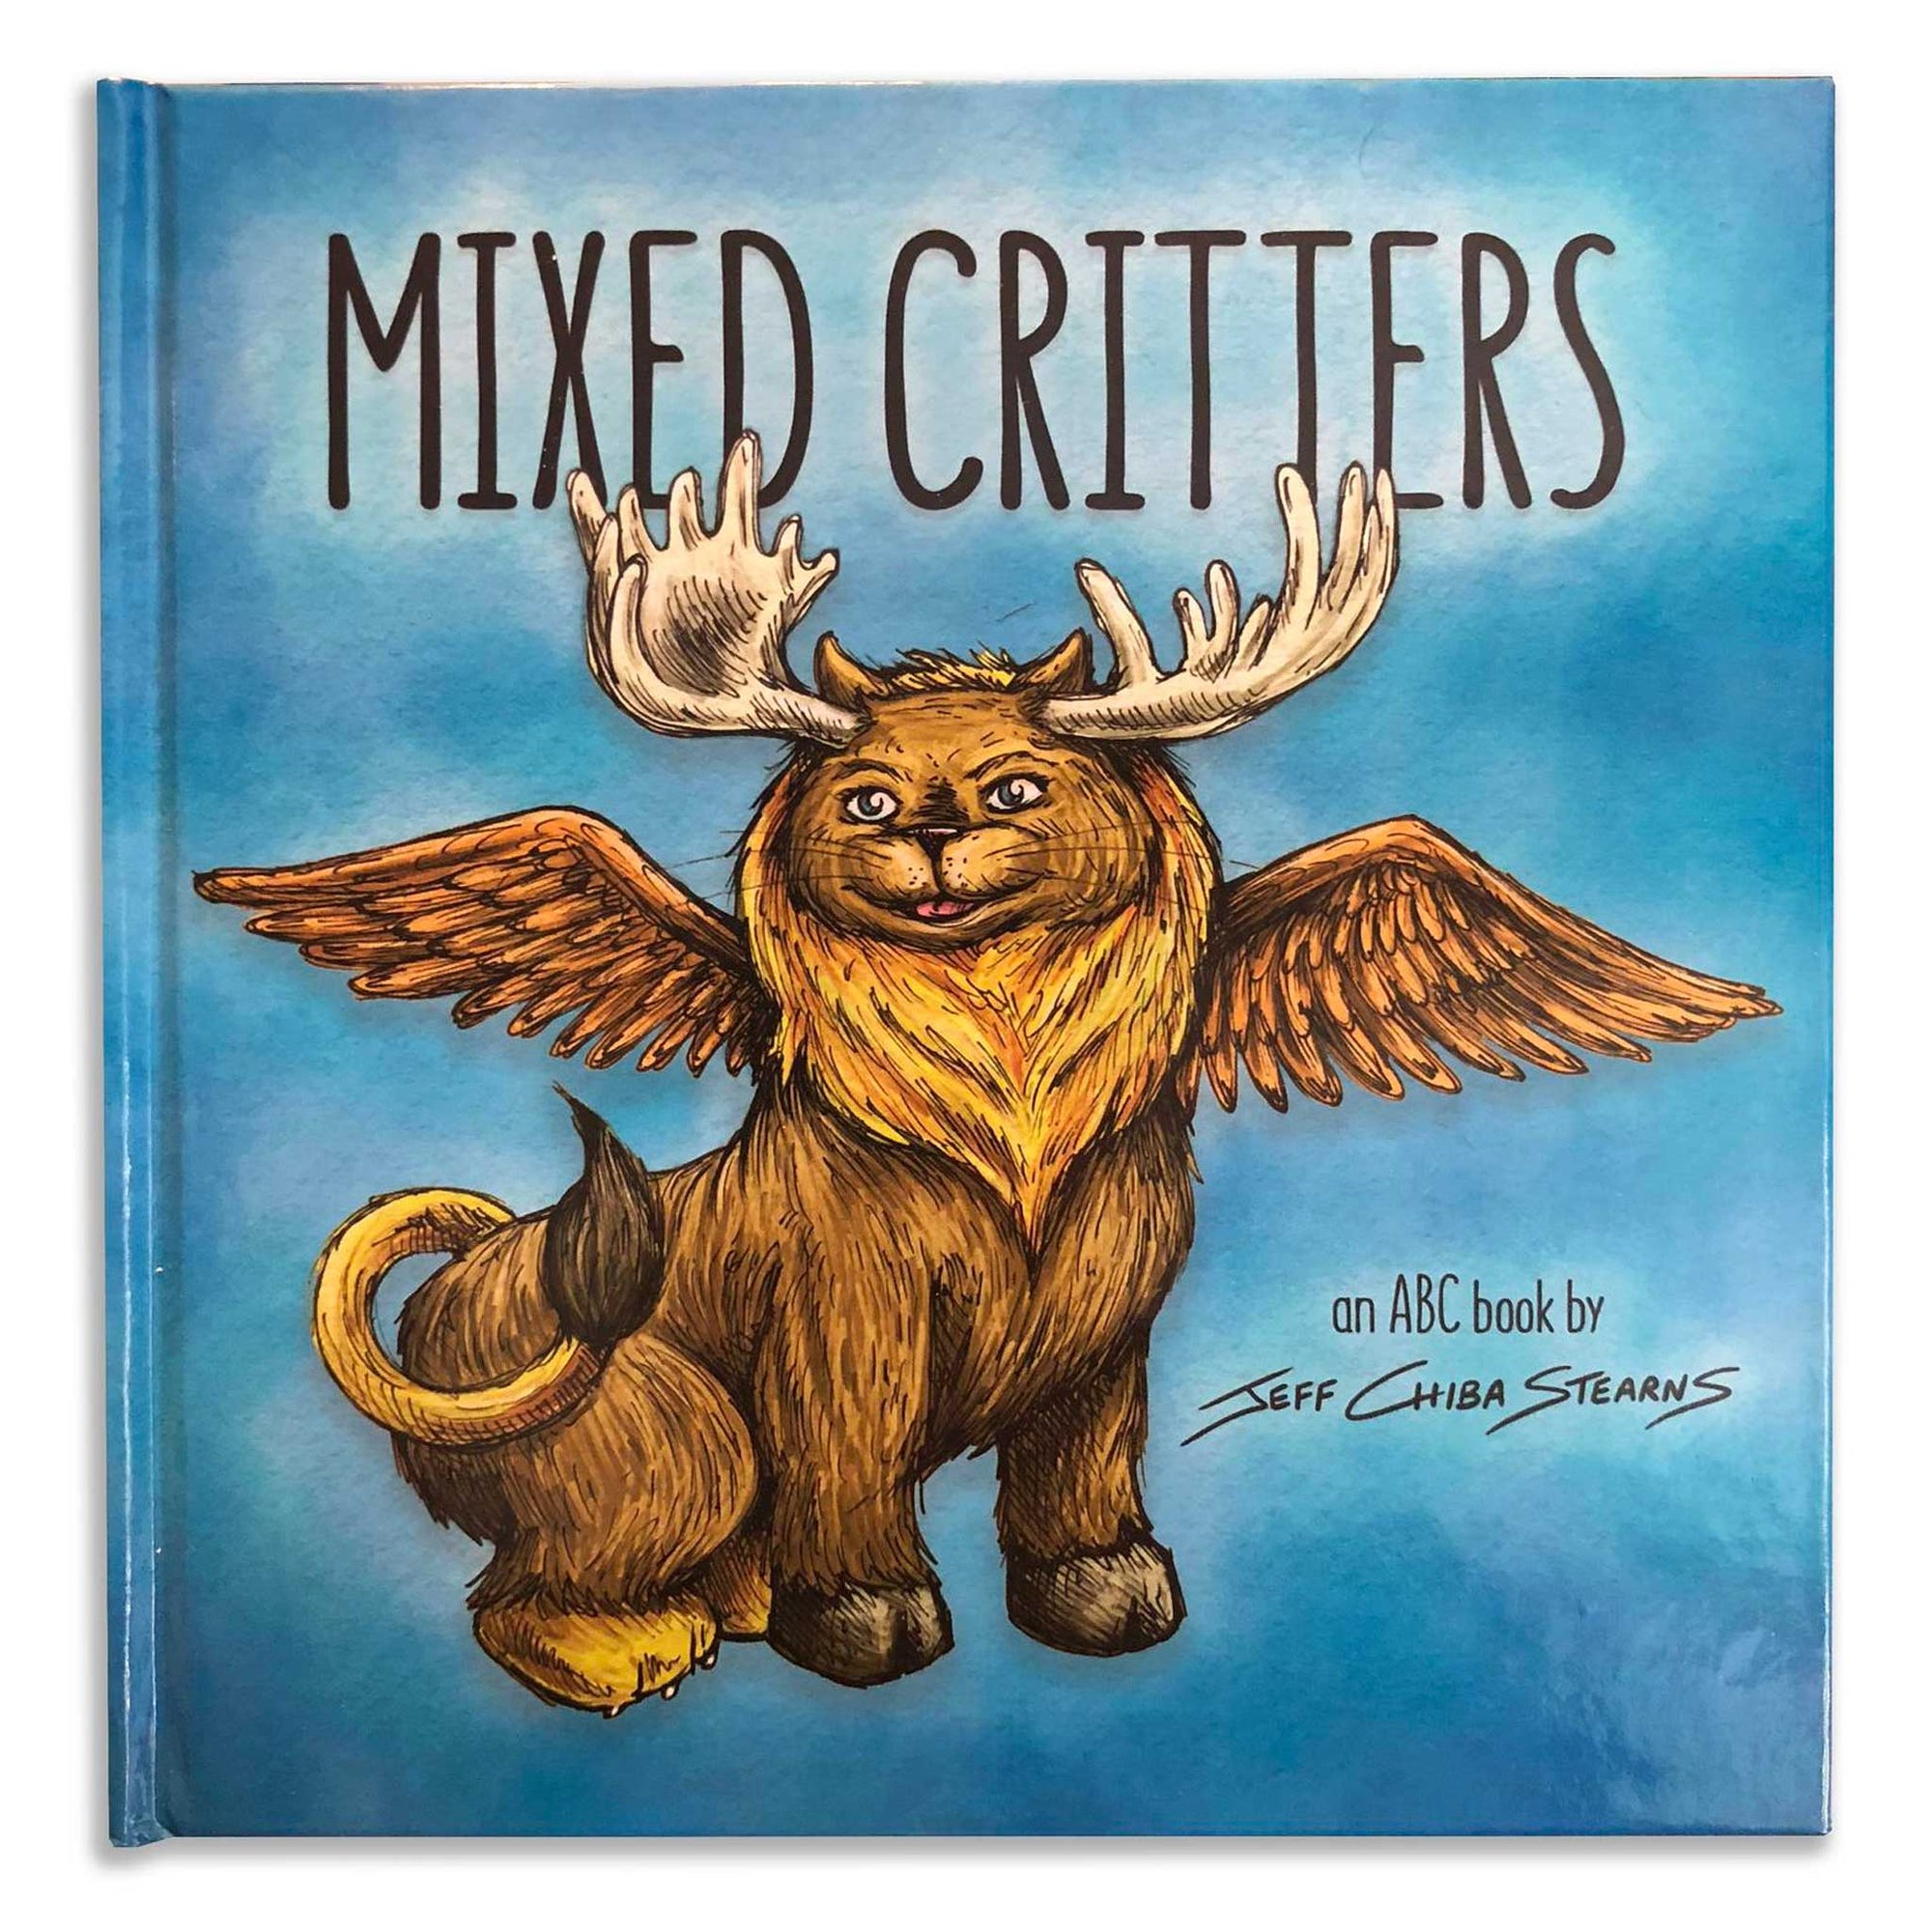 "Mixed Critters, an ABC Book" by Jeff Chiba Stearns